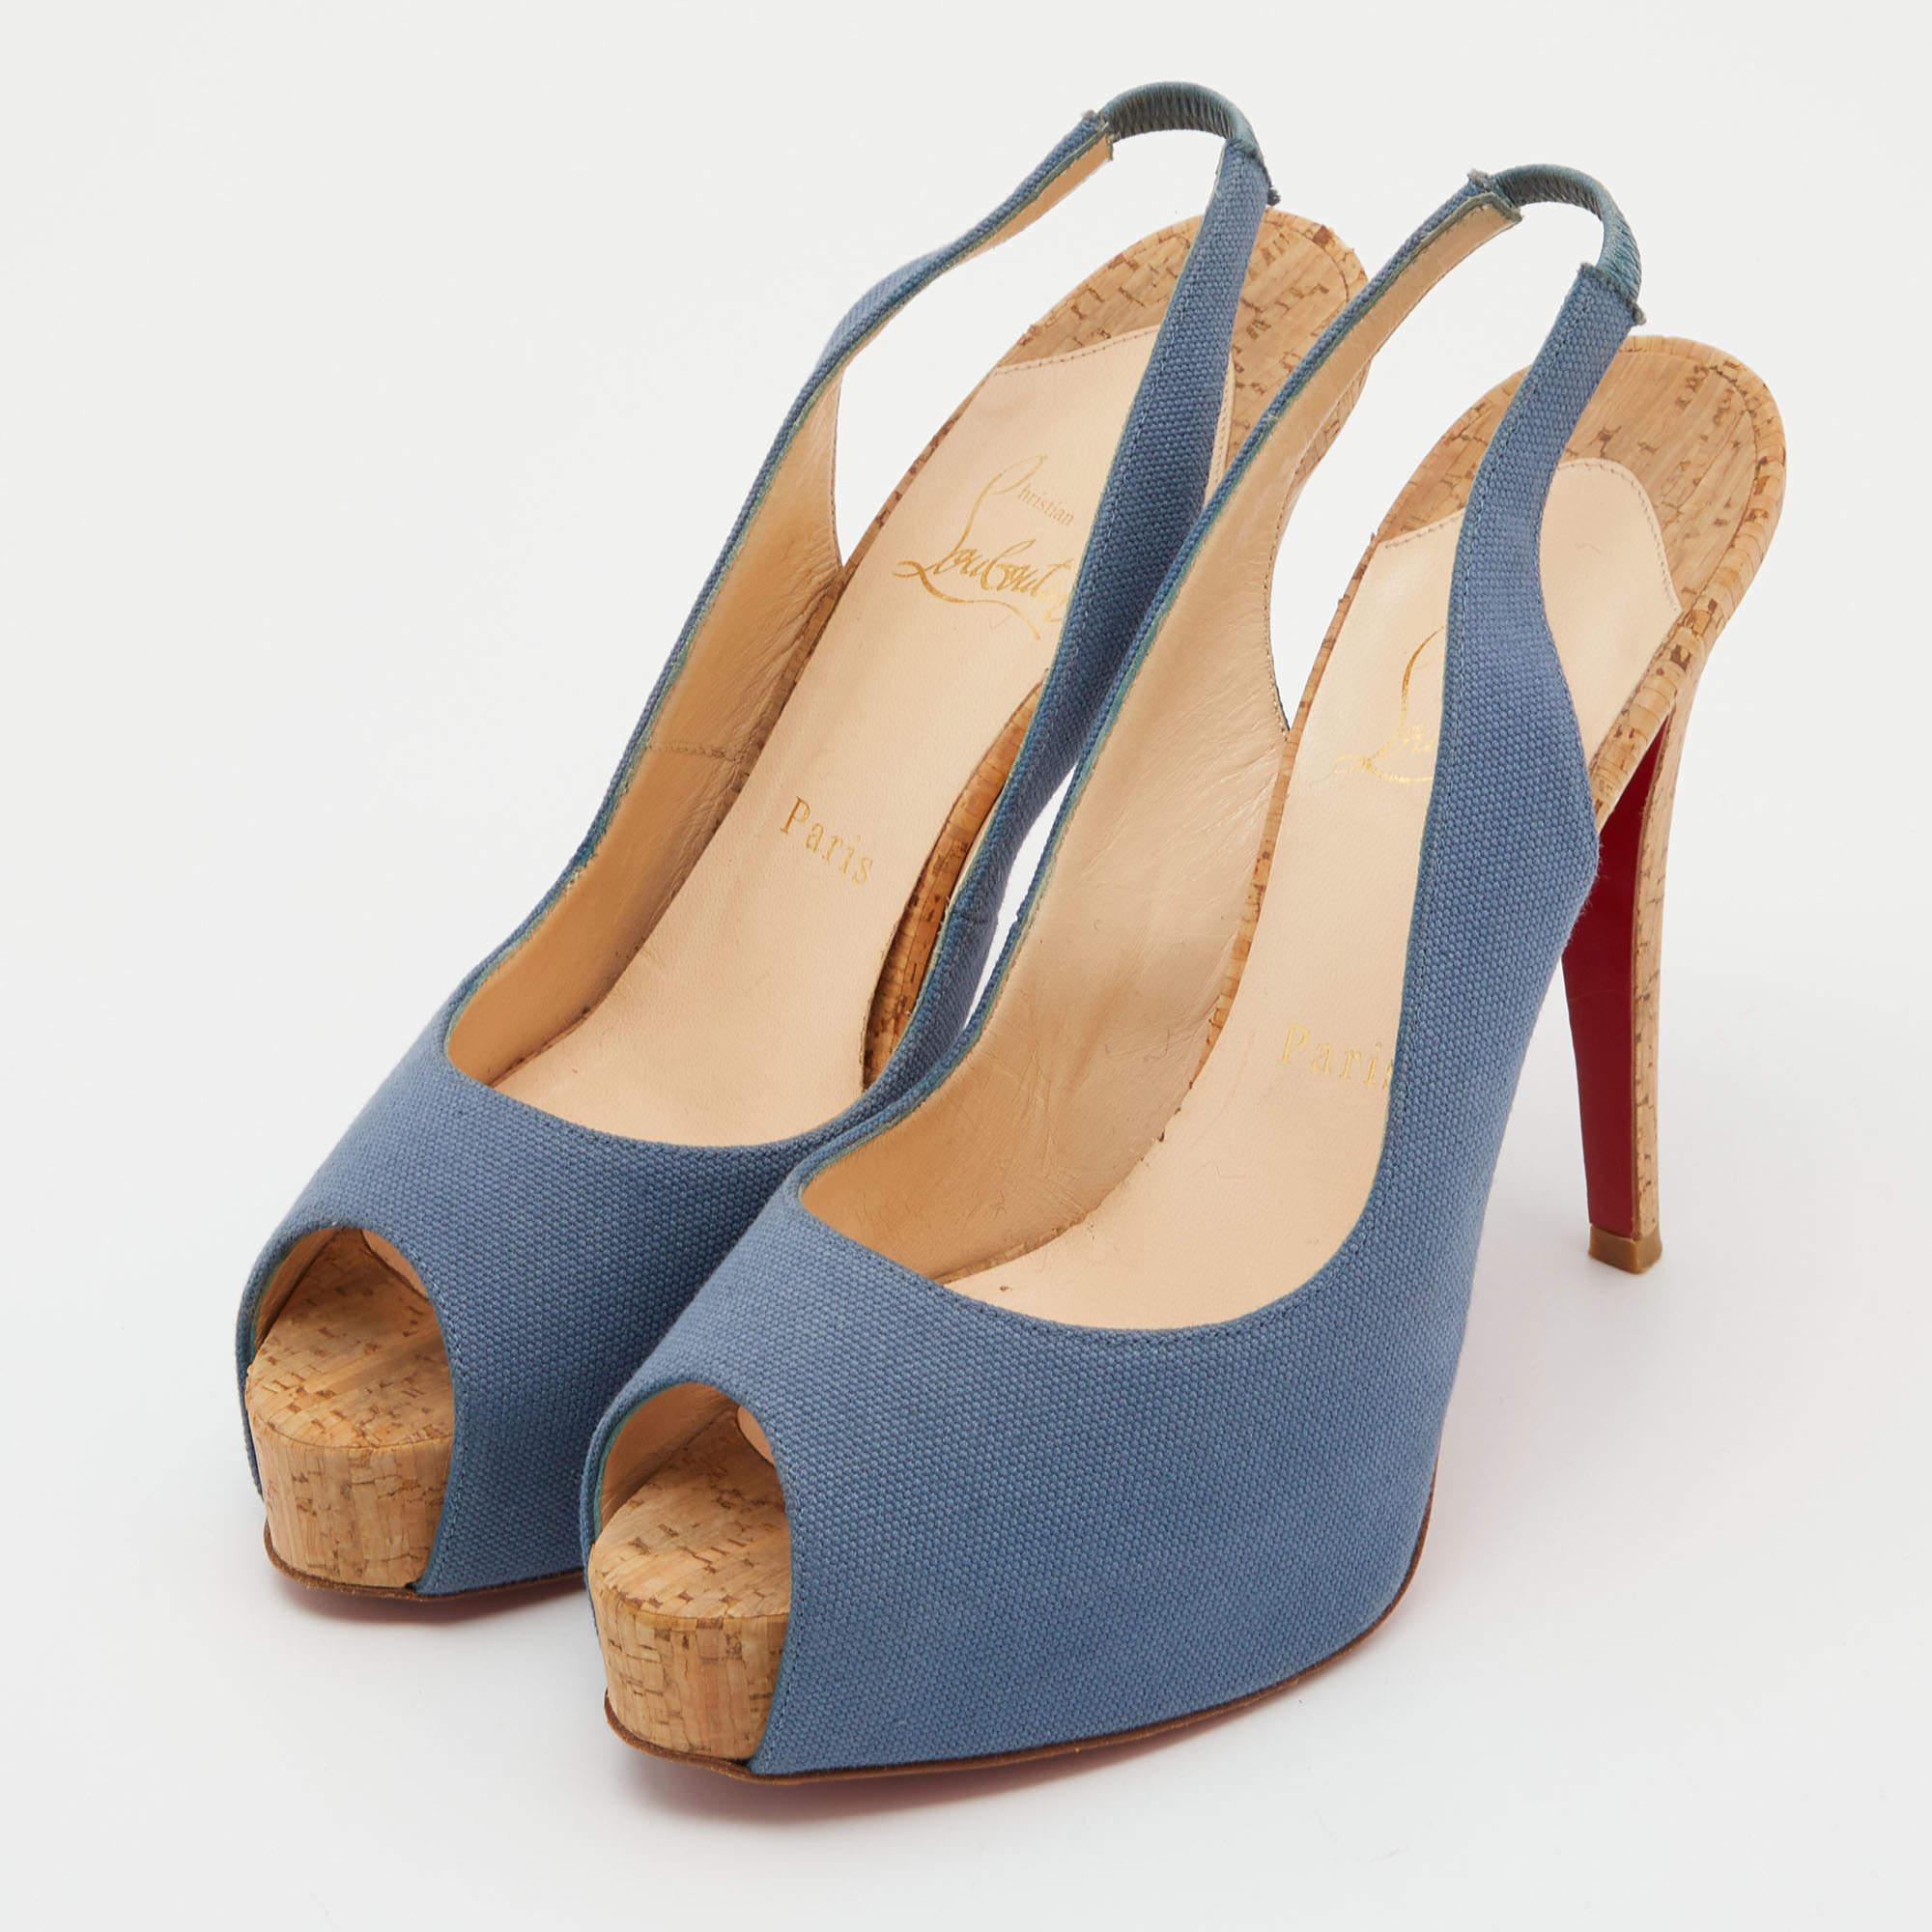 Stride through the day with confidence by adorning this pair of Christian Louboutin pumps. Created from canvas, its well-designed curves will elegantly outline your feet. The 12.5cm heels of these peep-toe shoes will take your fashion sense to new